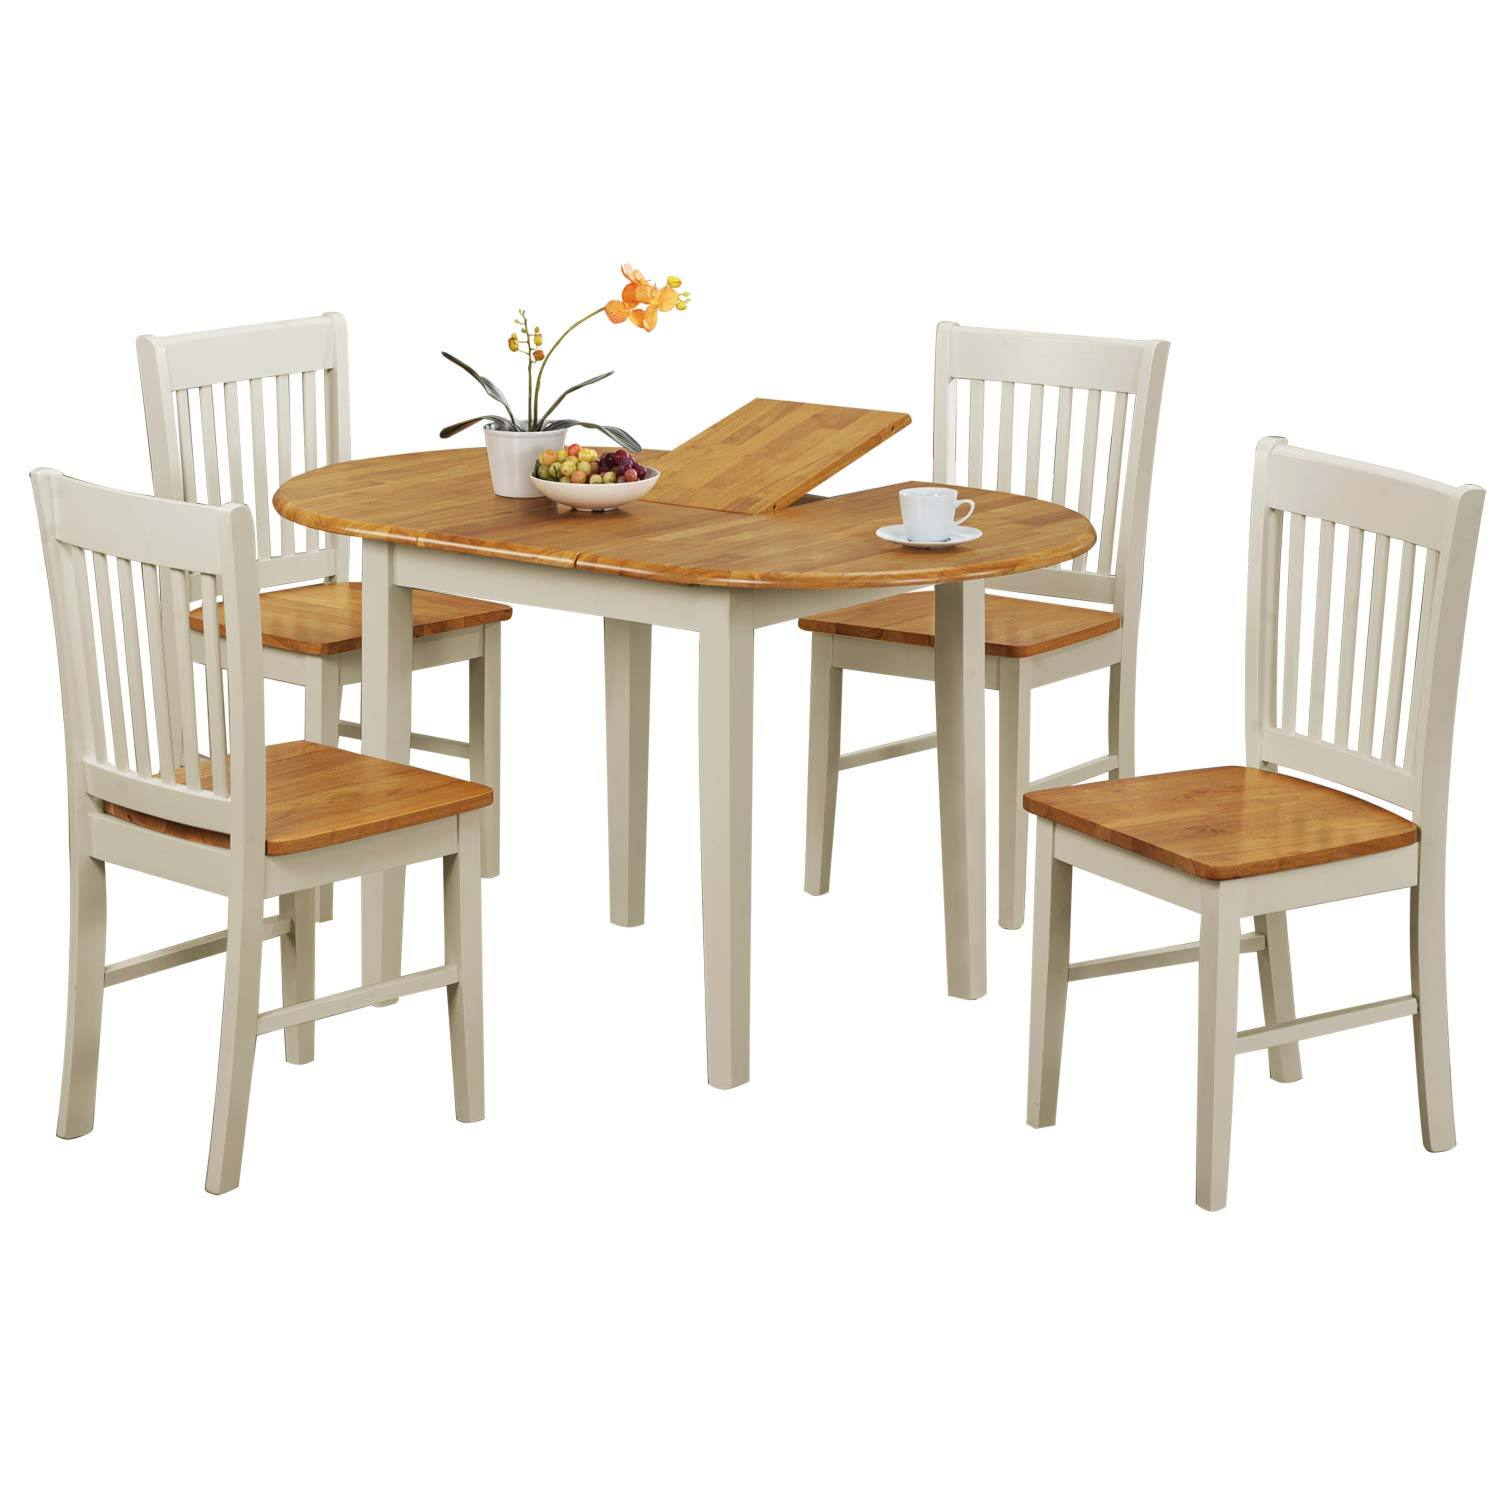 Kentucky Extending Dining Table And Four Chairs Set regarding proportions 1500 X 1500